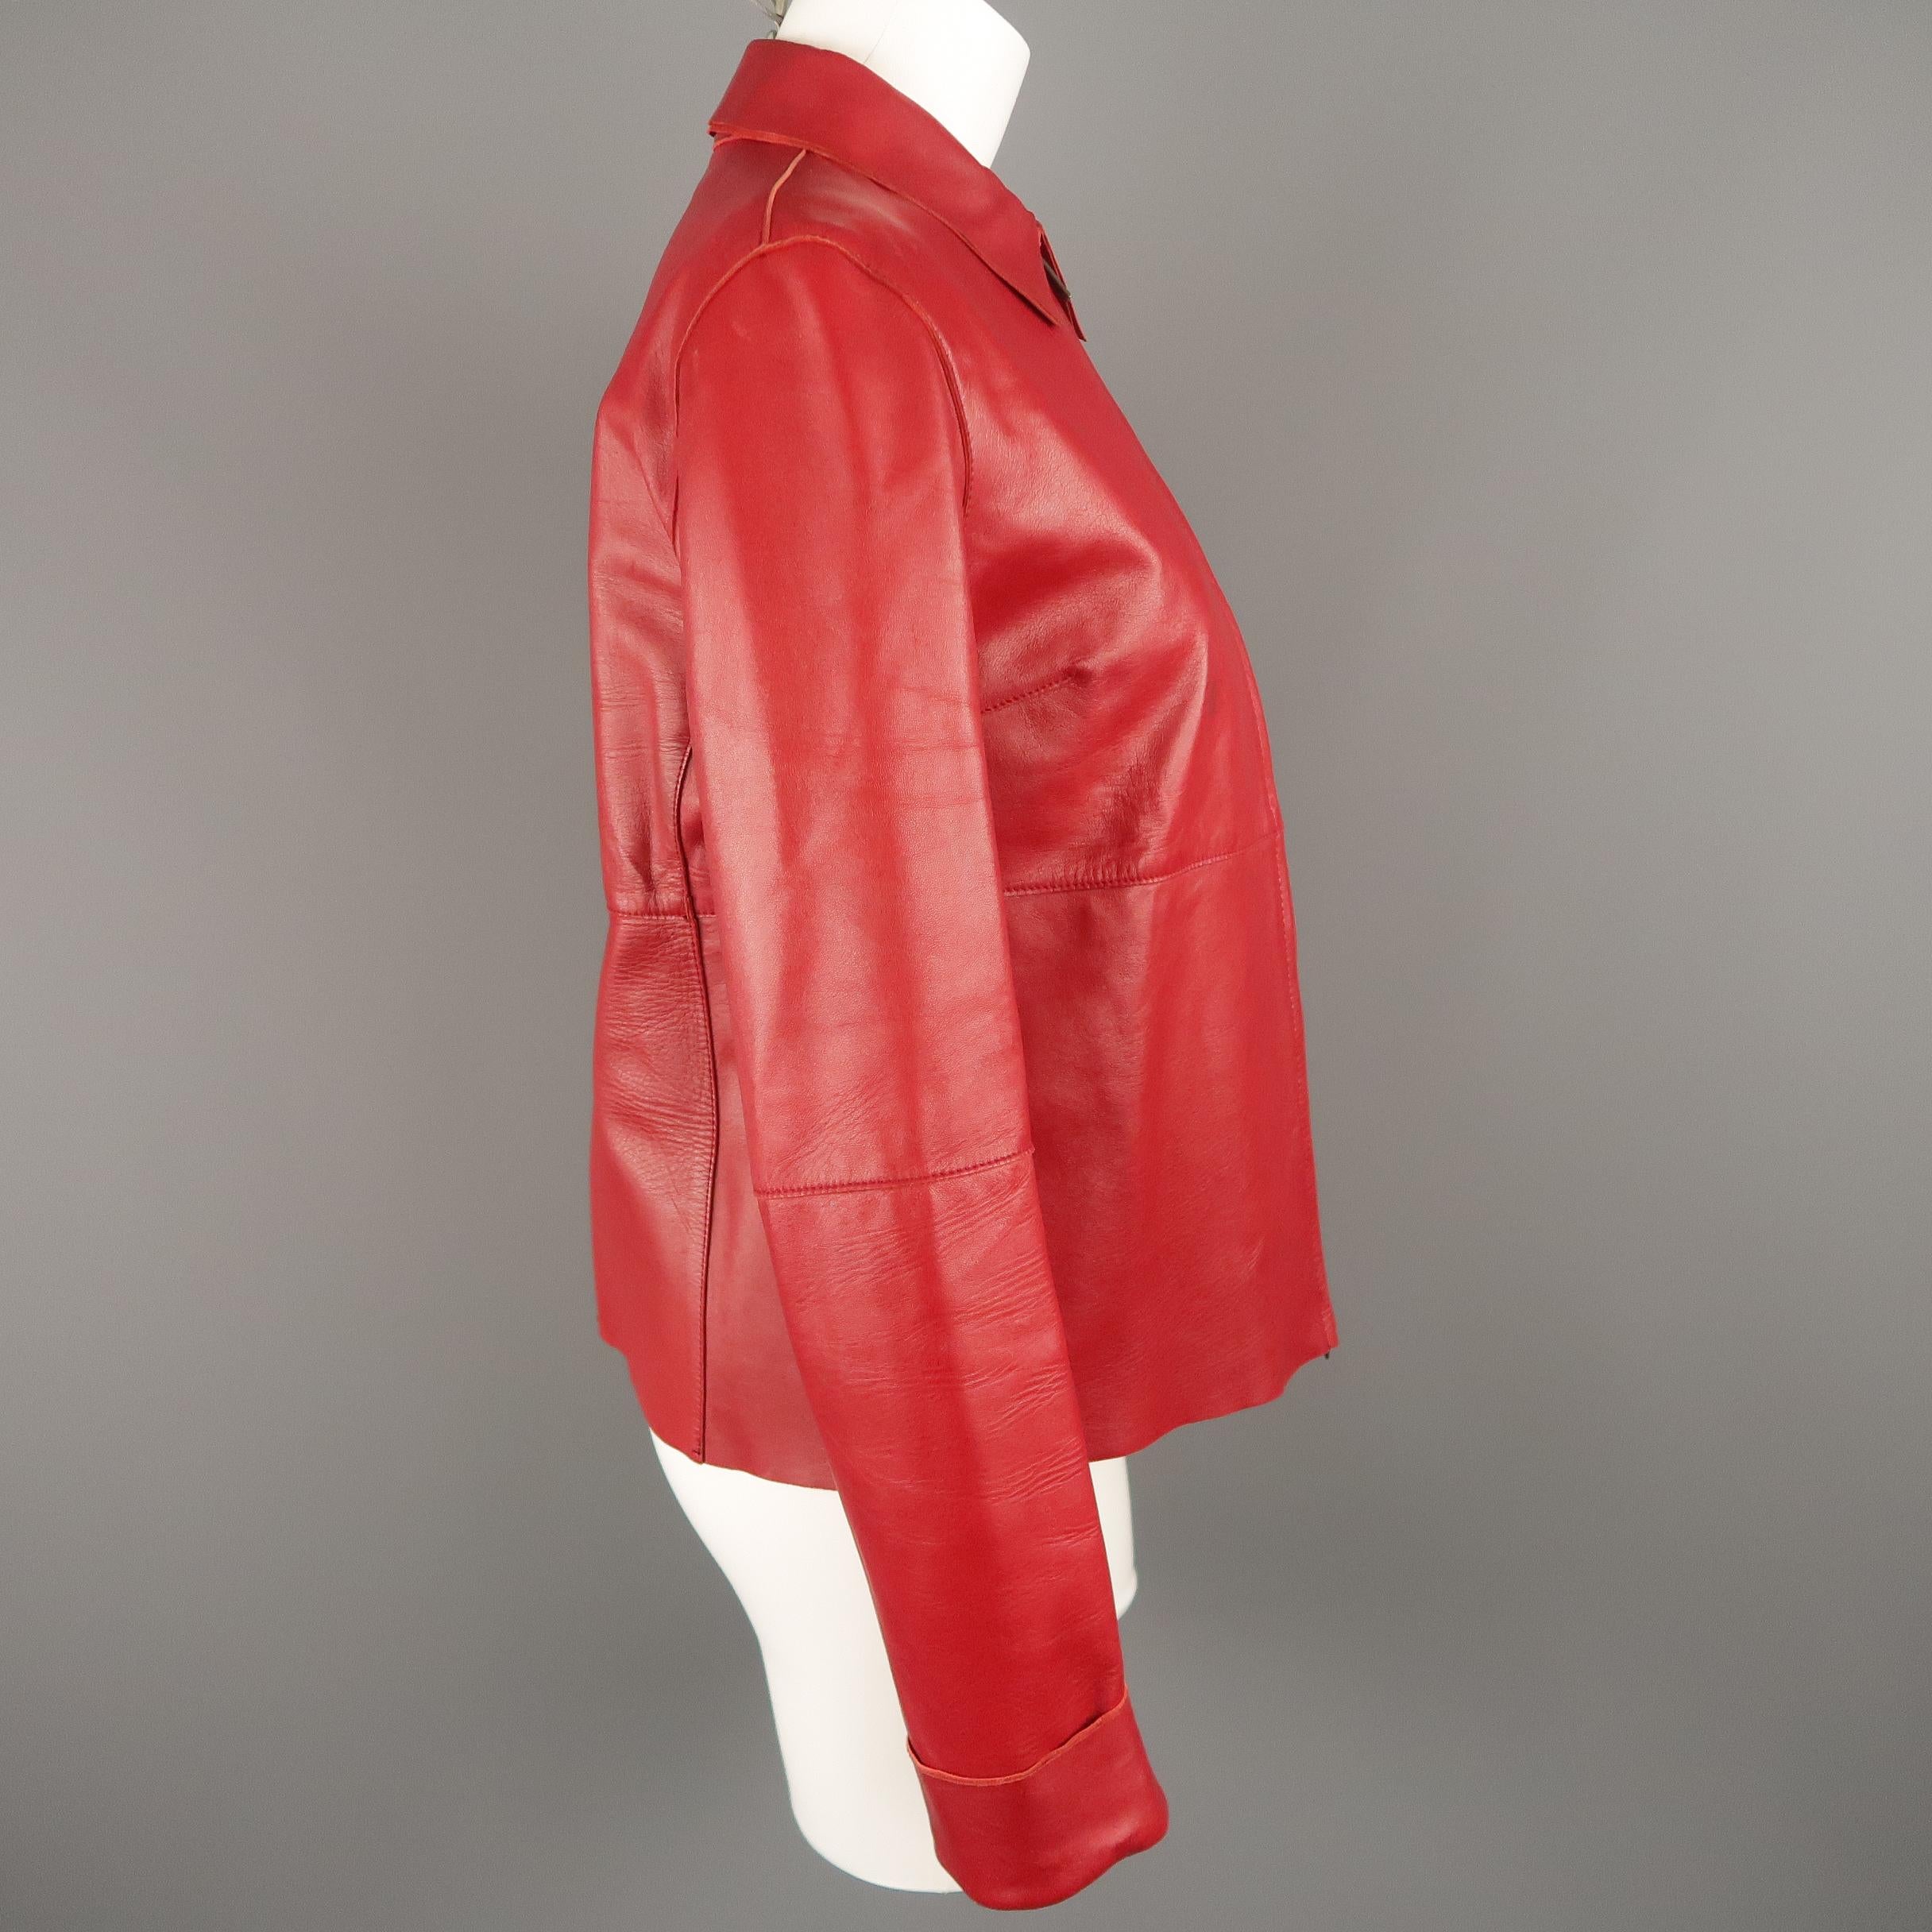 Women's MALO Size 6 Red Leather Collared Jacket